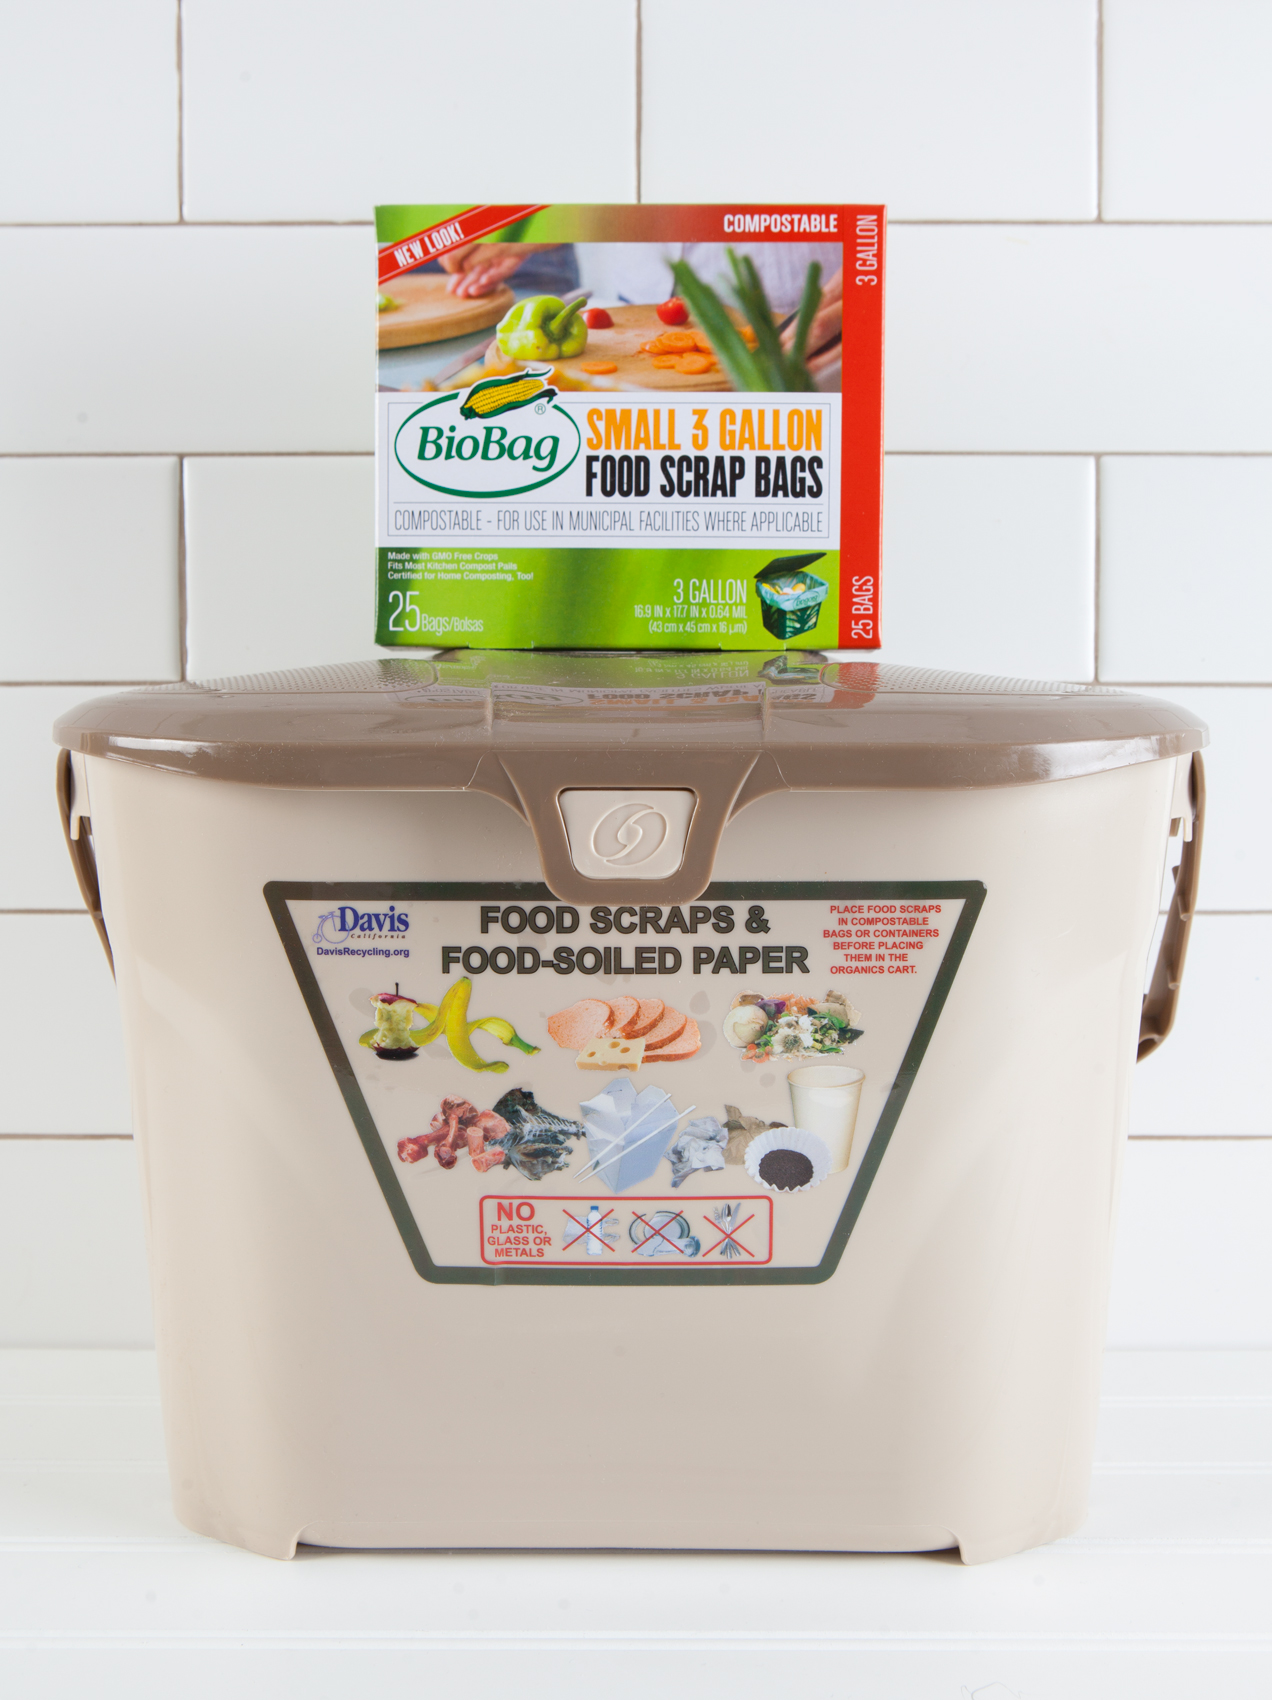 Composting Container and biodegradable Bag